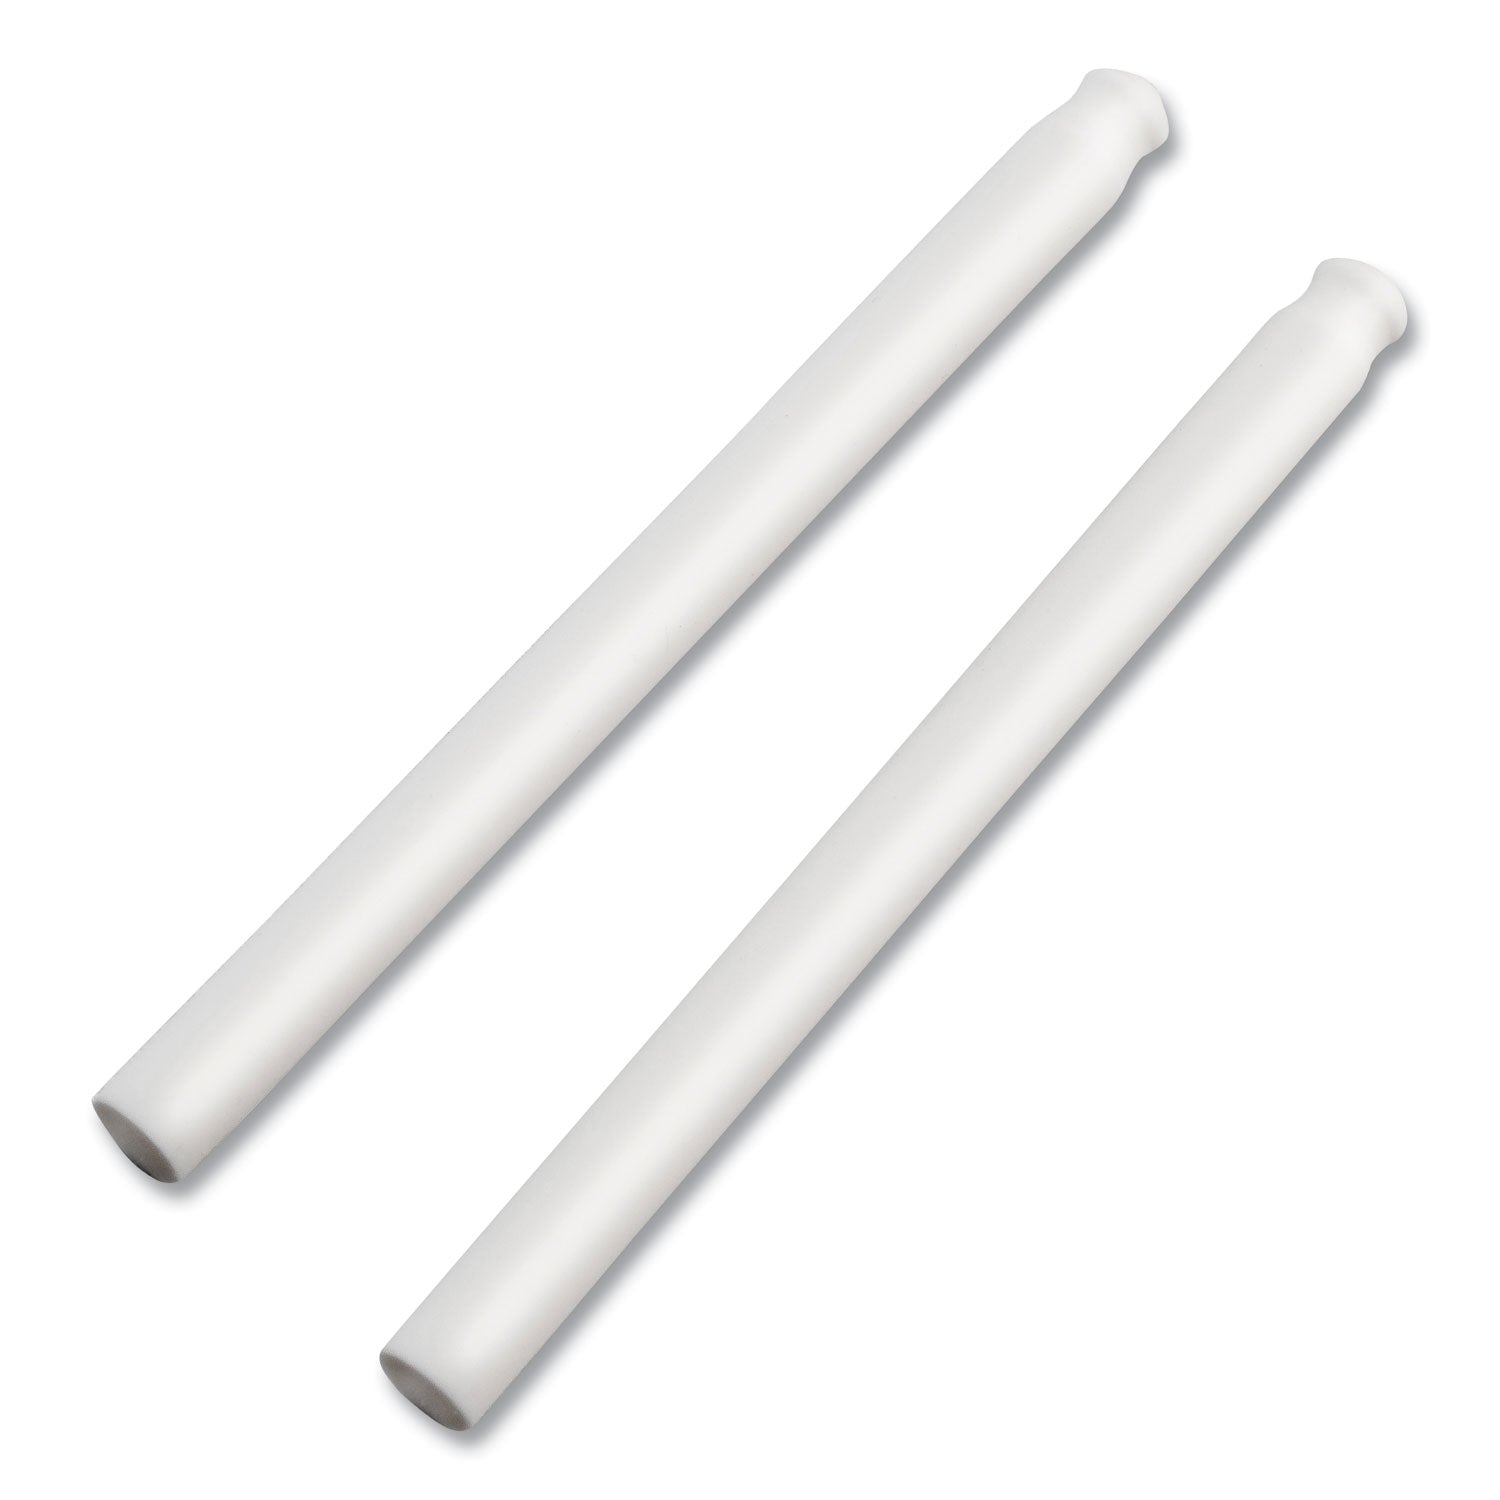 Clic Eraser Refills for Pentel Clic Erasers, Cylindrical Rod, White, 2/Pack - 